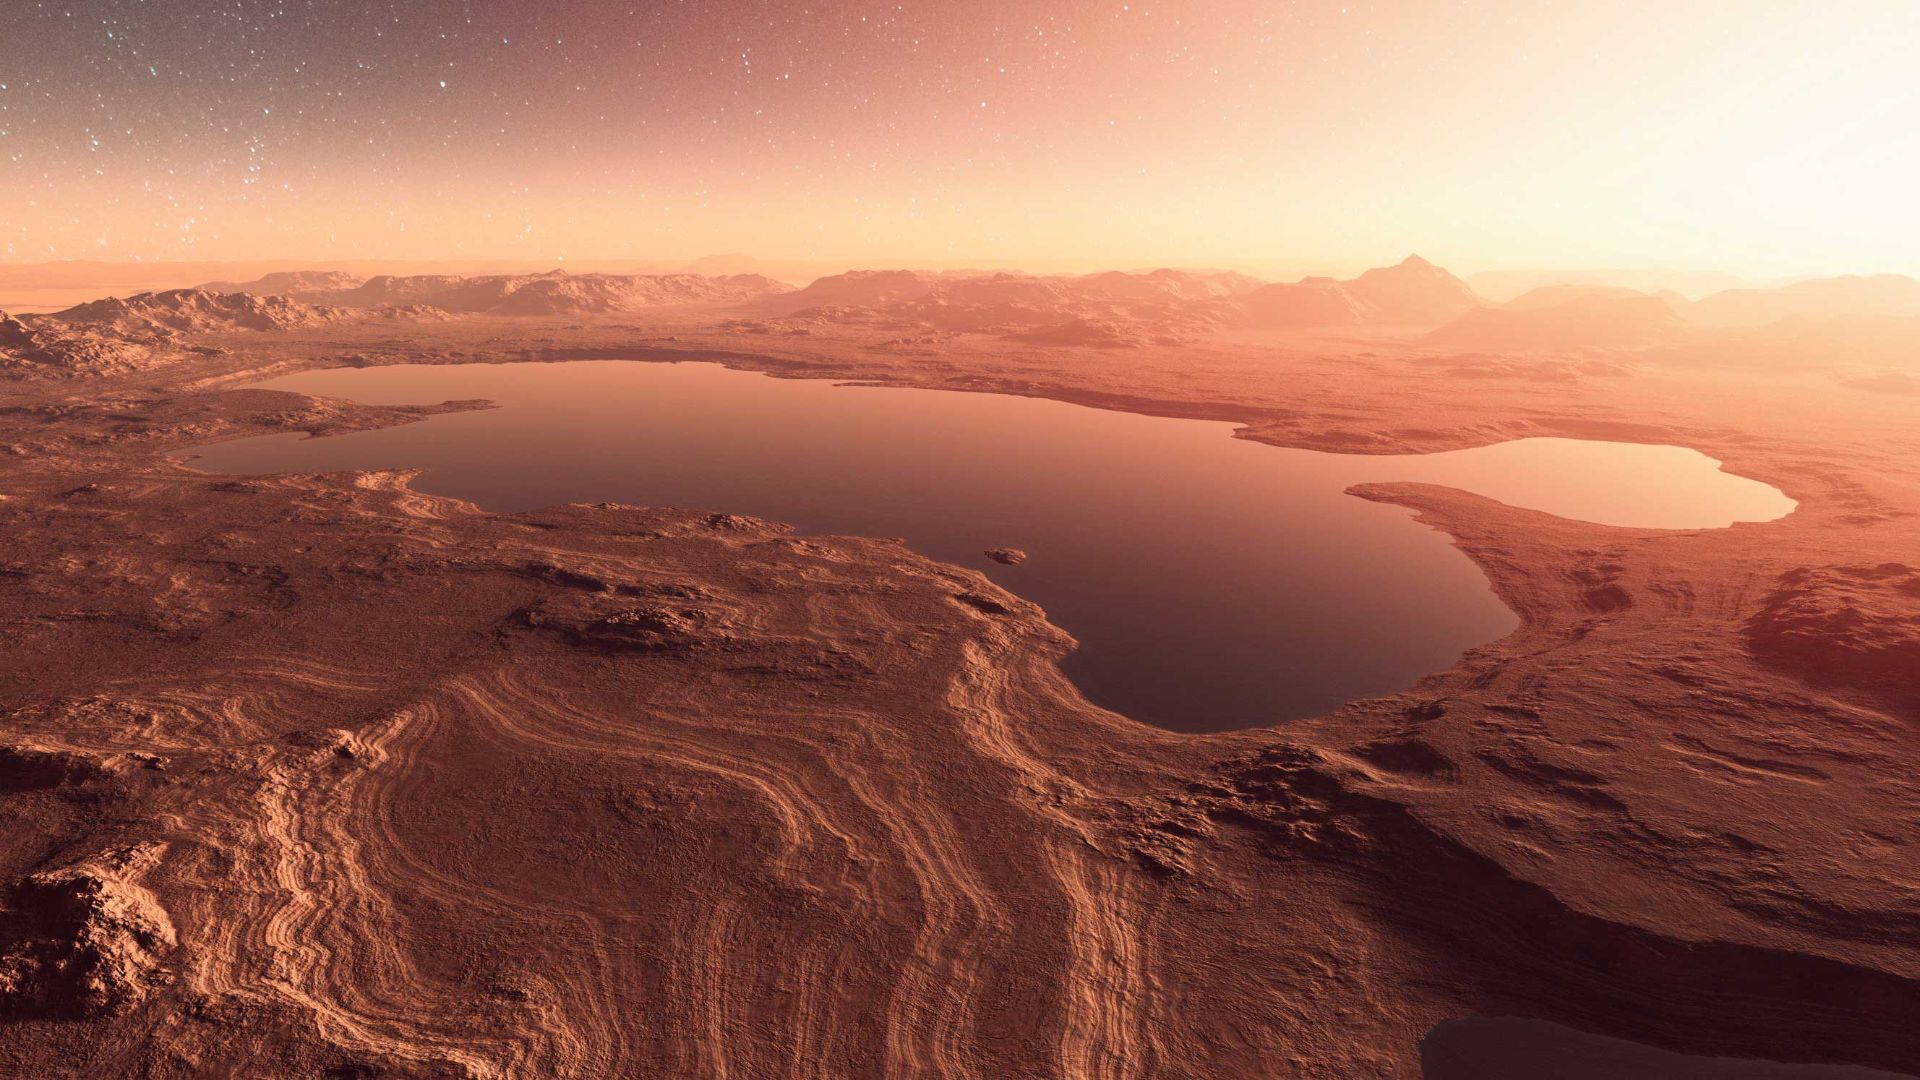 Computer image of Mars with water lakes